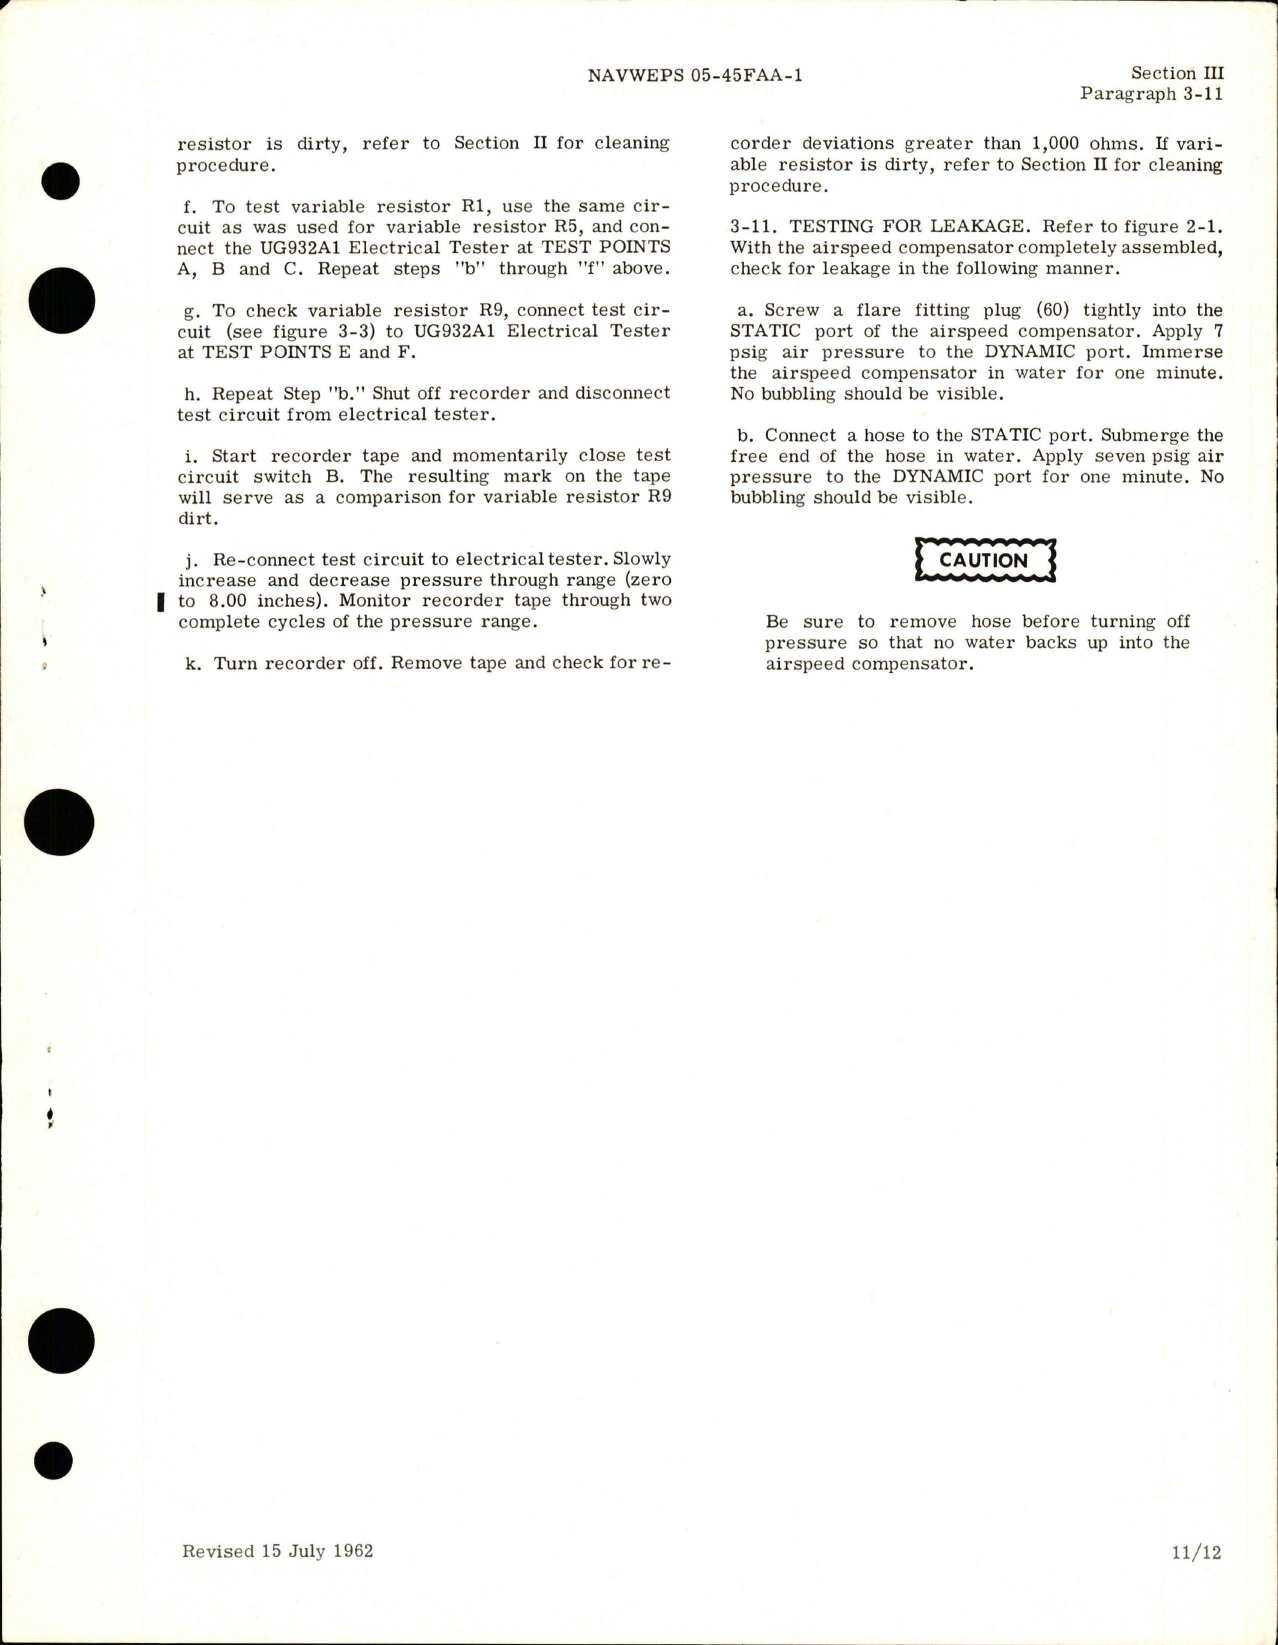 Sample page 7 from AirCorps Library document: Overhaul Instructions for Airspeed Compensator - Parts PG7007B20, PG7007B23, and PG7007B24